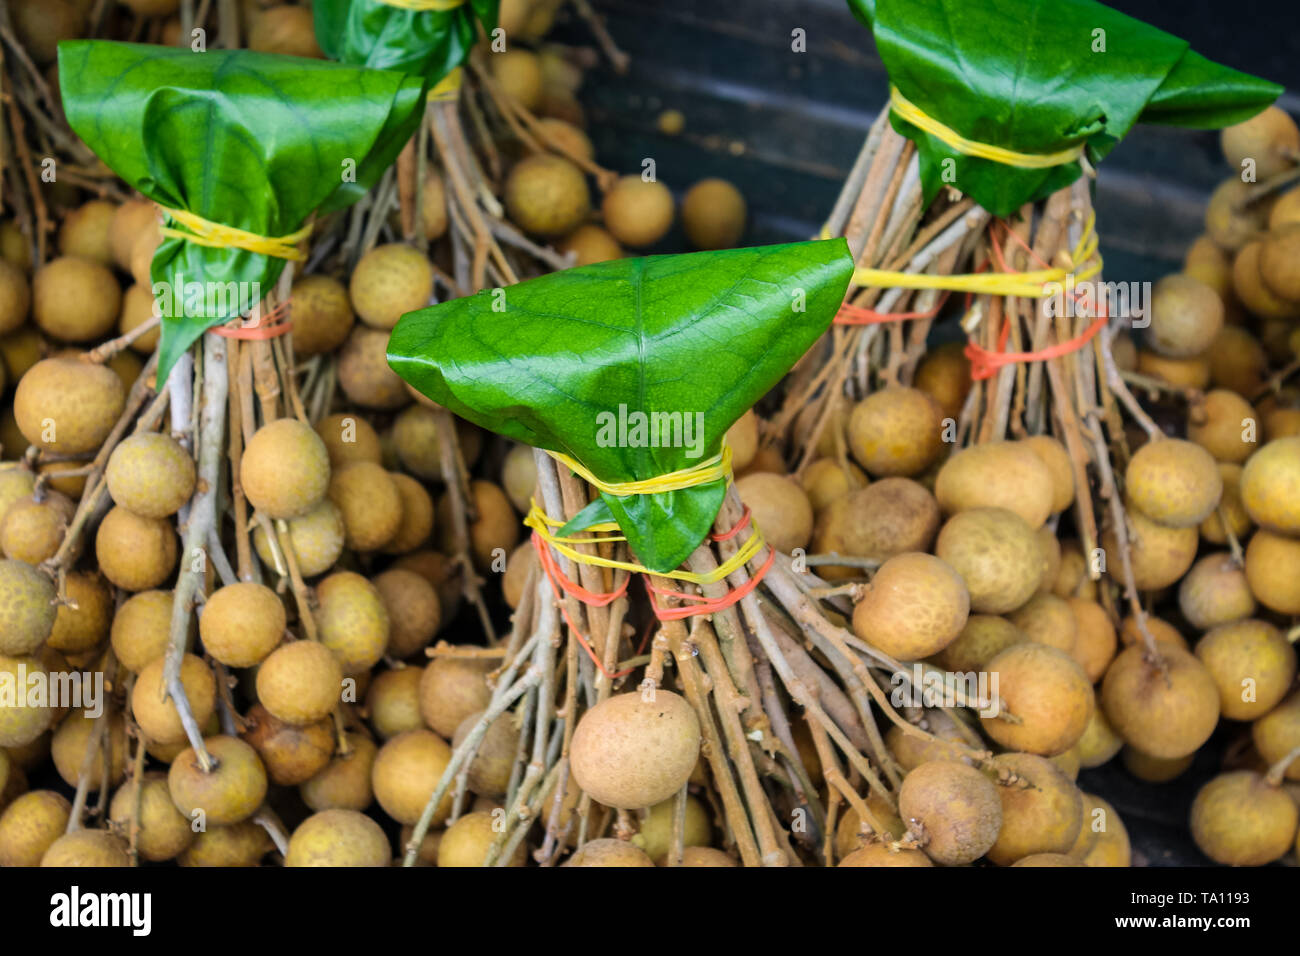 Mata Market High Resolution Stock Photography and Images - Alamy